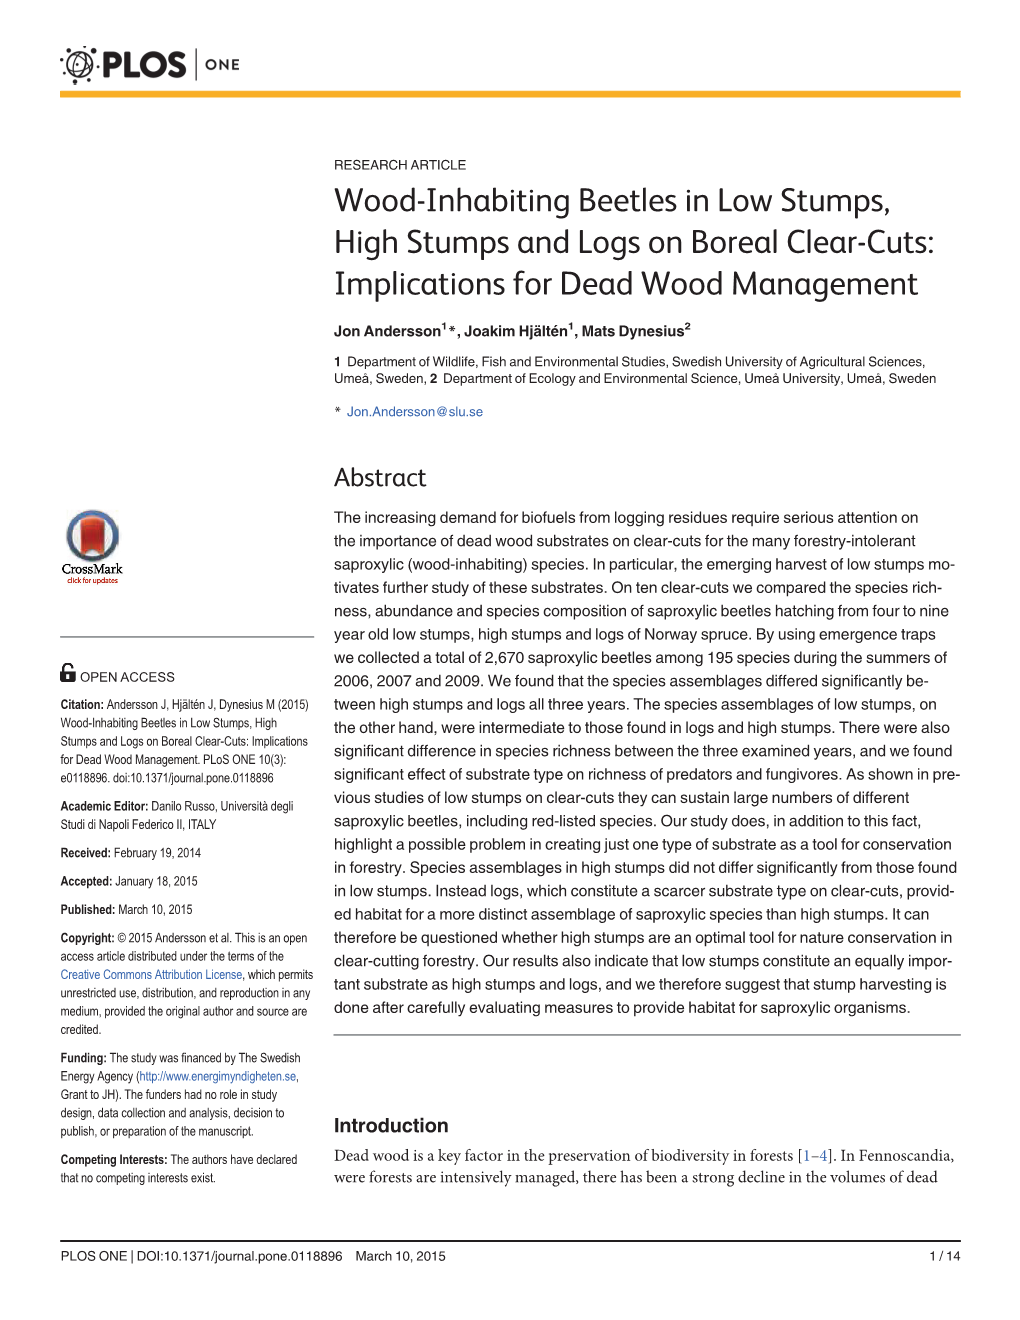 Implications for Dead Wood Management